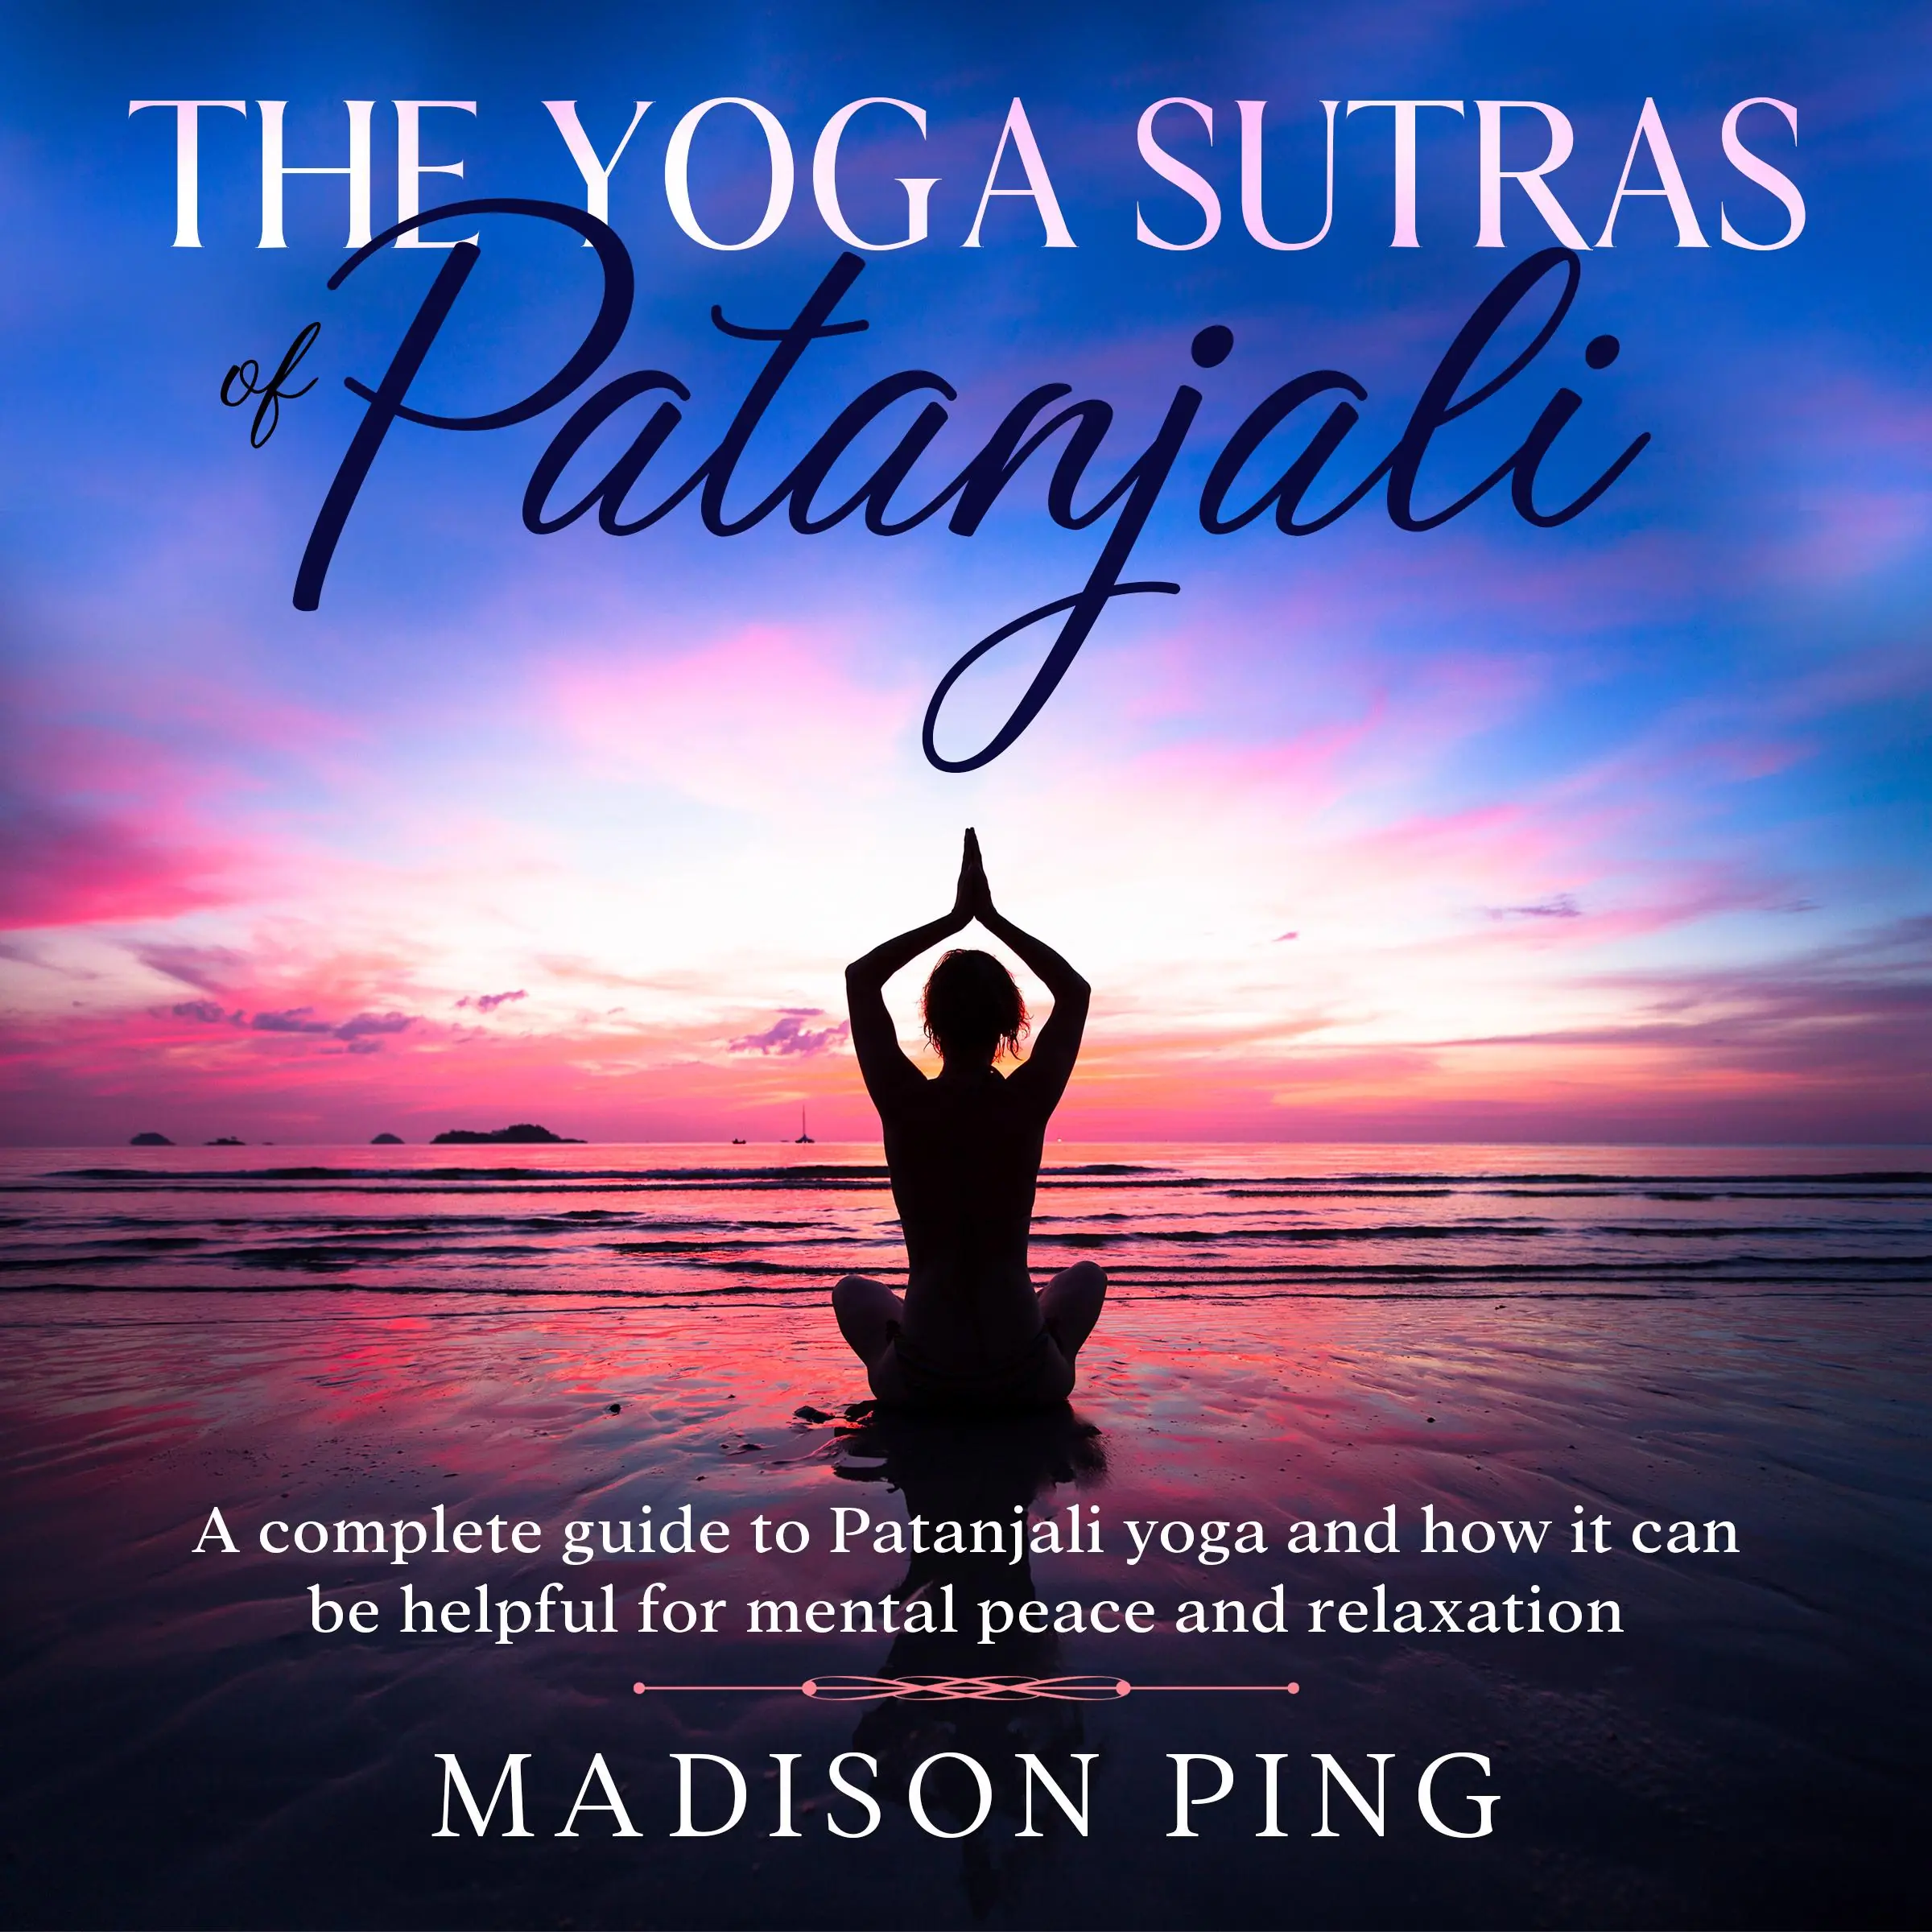 The Yoga Sutras of Patanjali: A Complete Guide to Patanjali Yoga and How It Can Be Helpful for Mental Peace and Relaxation Audiobook by Madison Ping